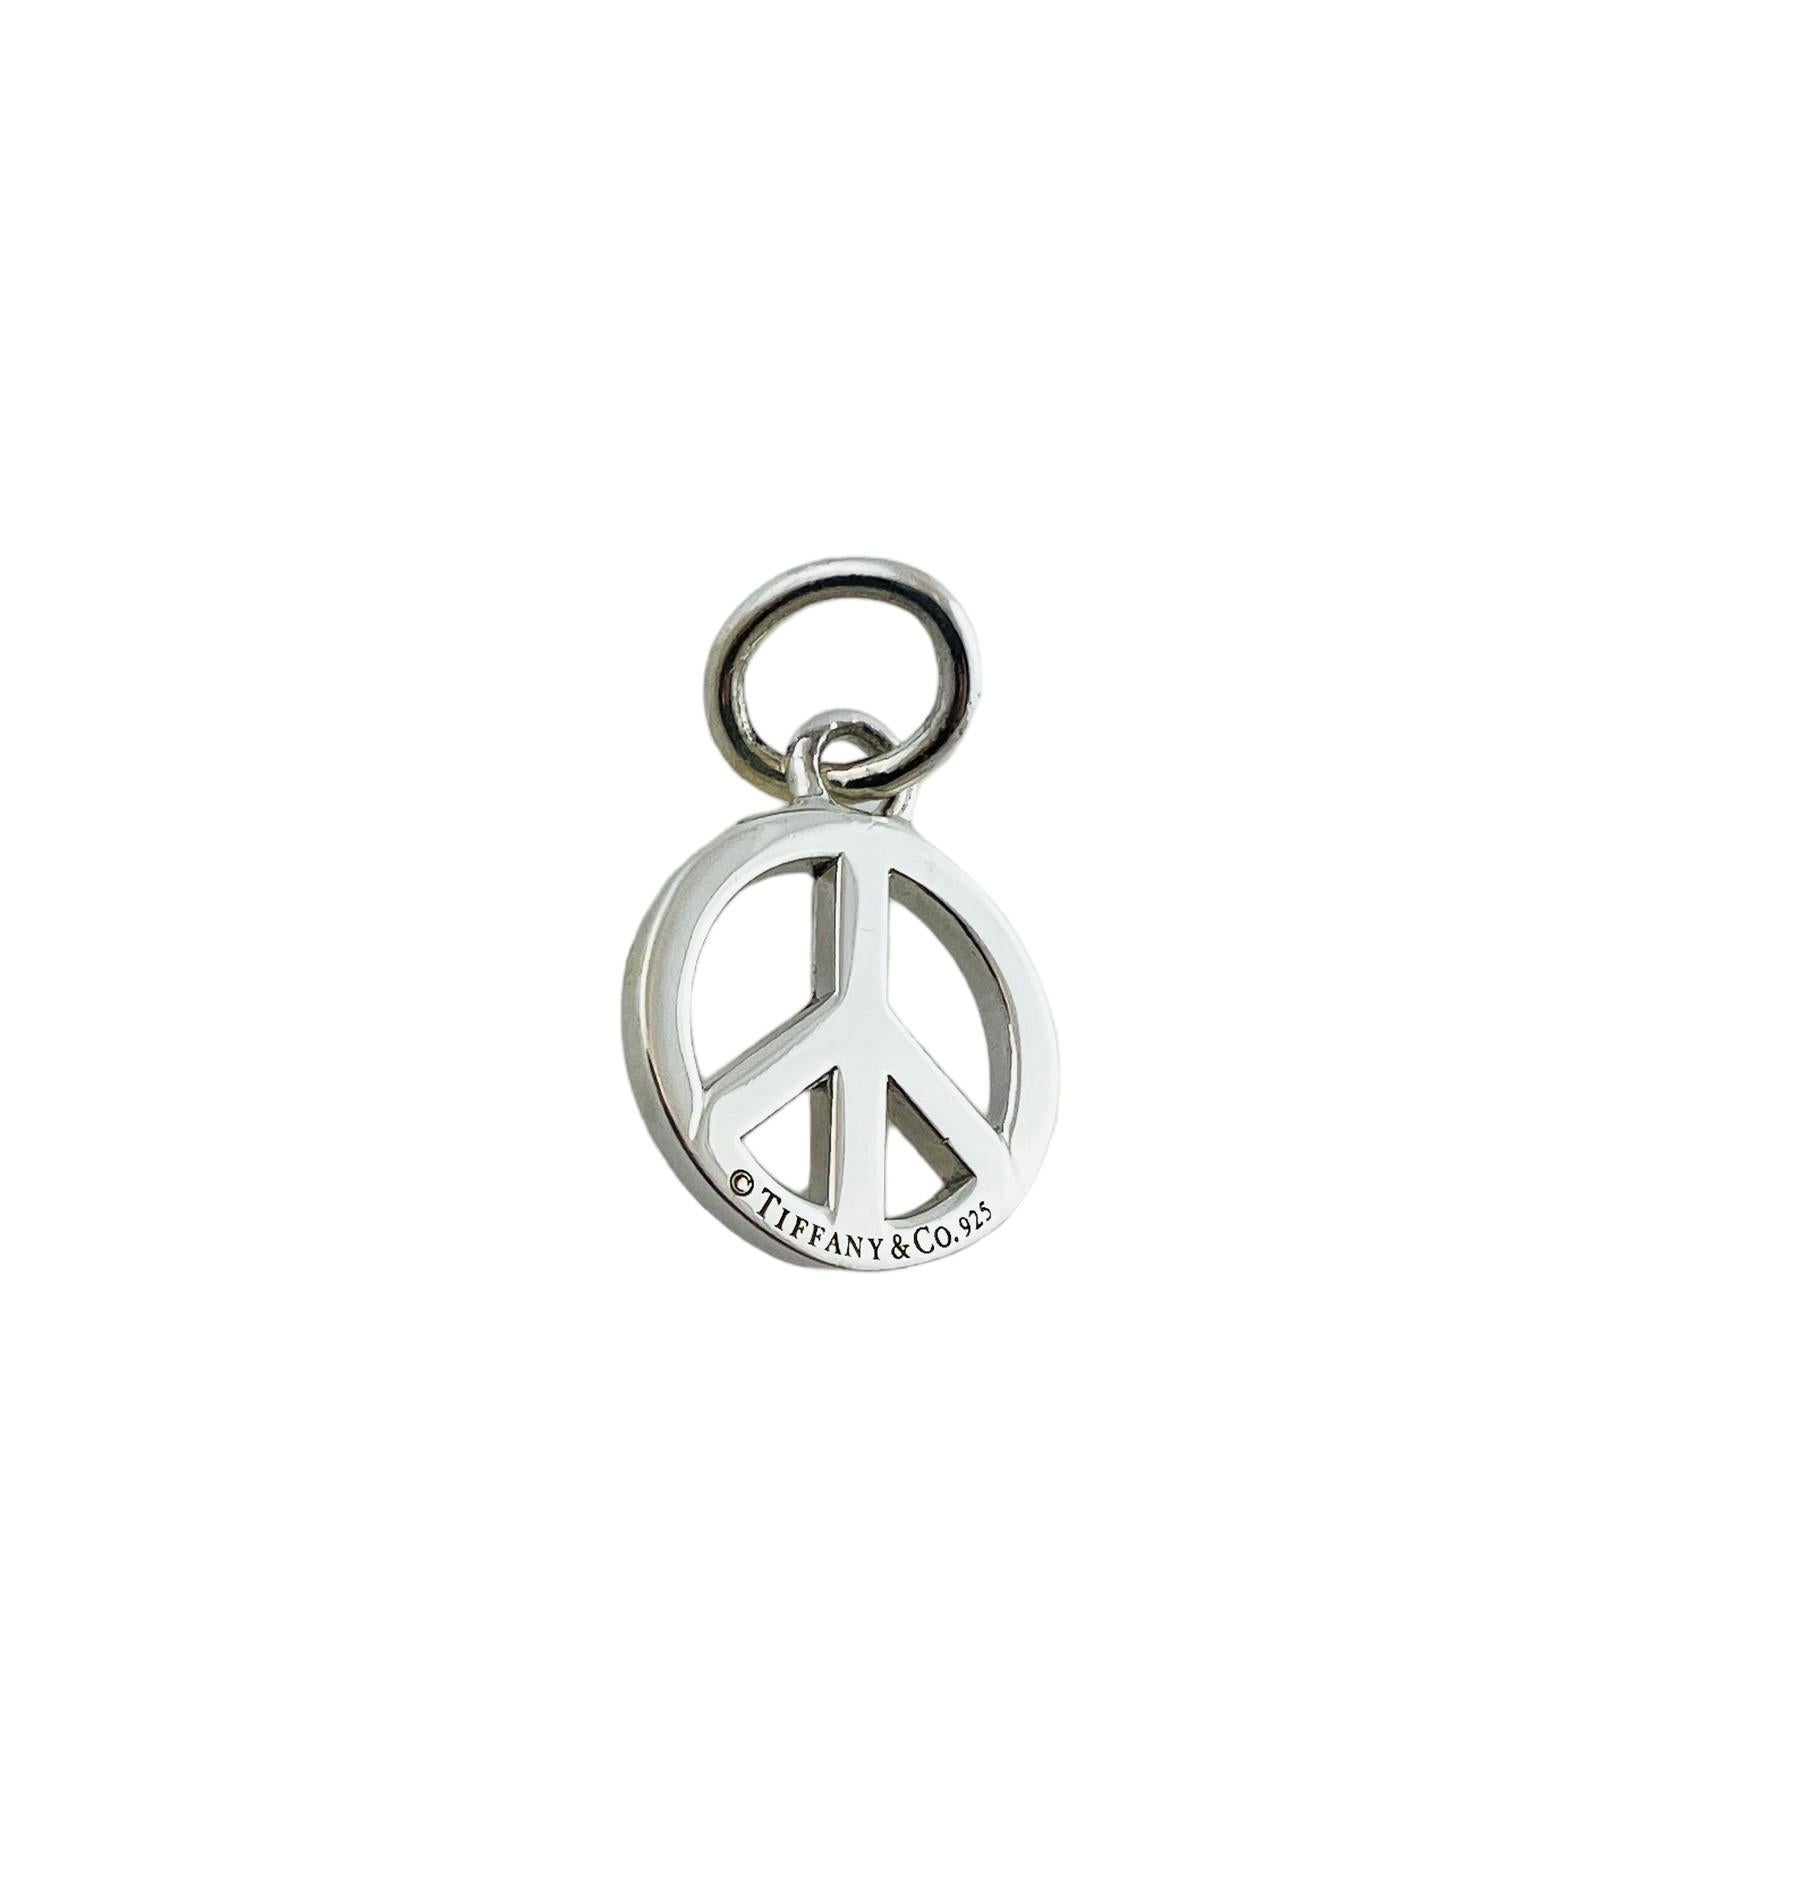 Vintage Tiffany & Co. Sterling Silver Peace Sign Pendant 

This Tiffany & Co. Peace sign pendant is set in sterling silver

It is approx. 21mm x 16mm x 2 mm

Stamped Tiffany & Co. 925

Very good preowned condition. Just polished by our